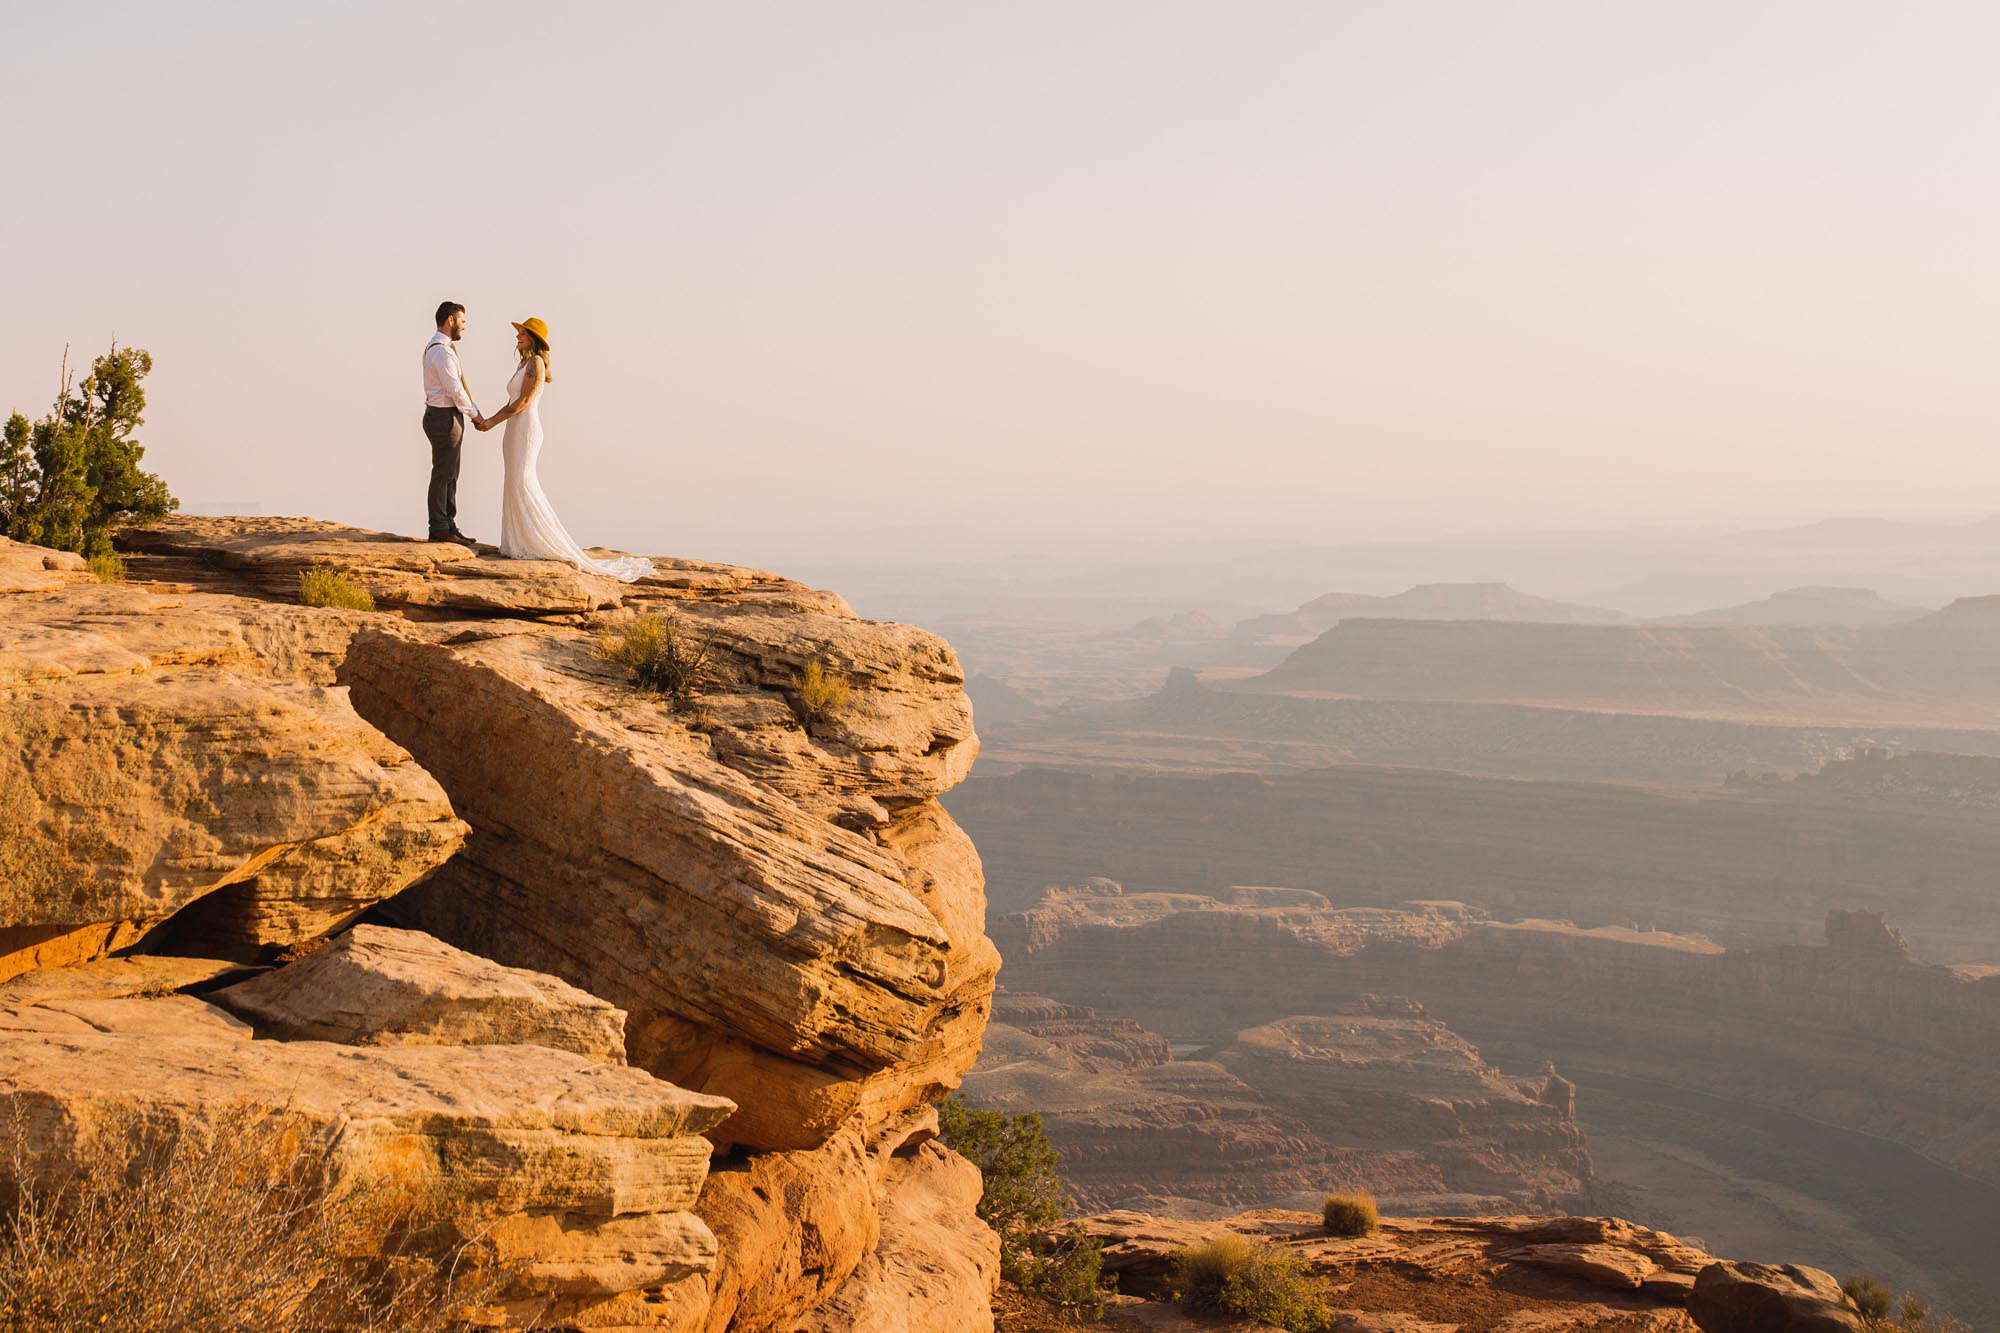 Grand Canyon elopement photography by Wanderlight, a Salt Lake City wedding photography company